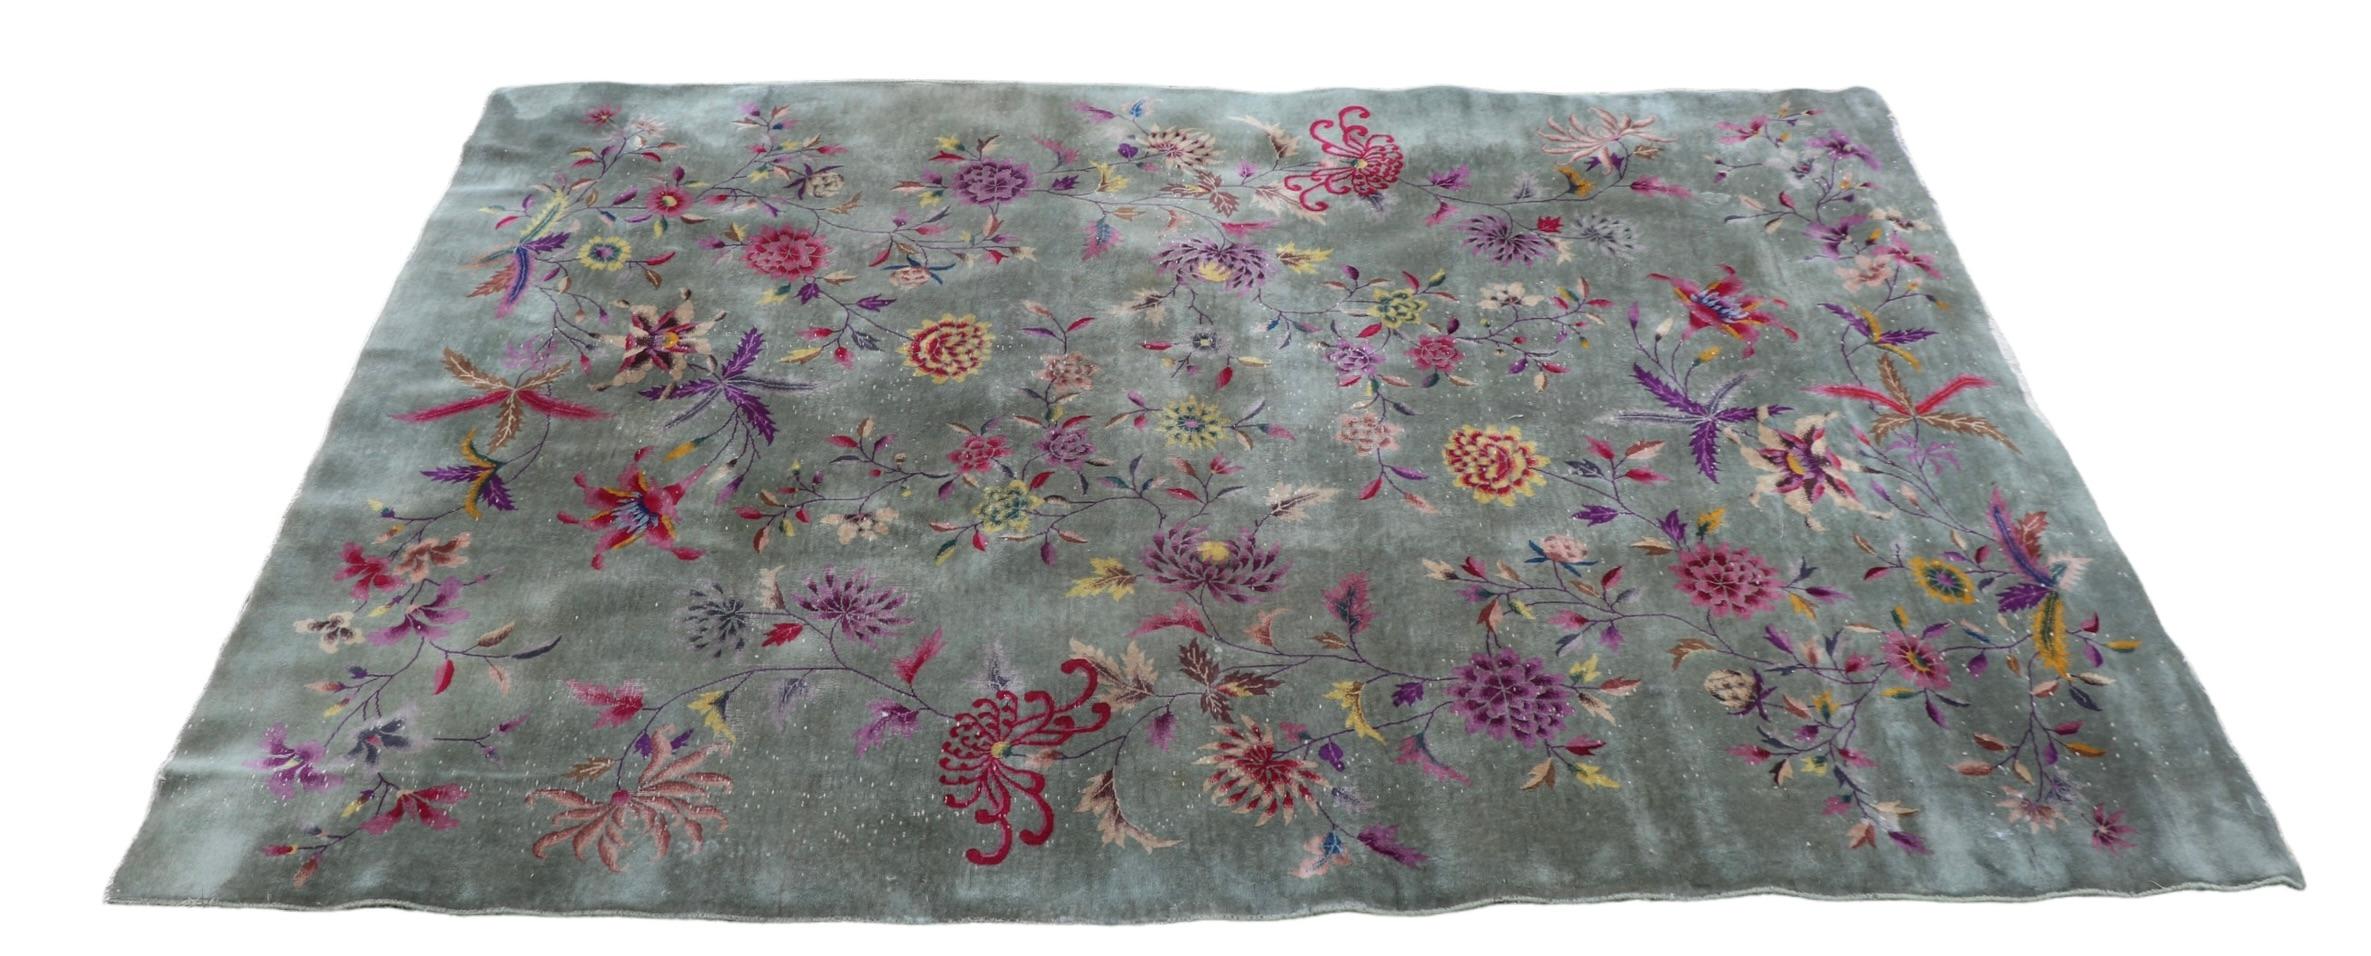 20th Century Art Deco Chinese Rug with Floral Motif c. 1920/1930's For Sale